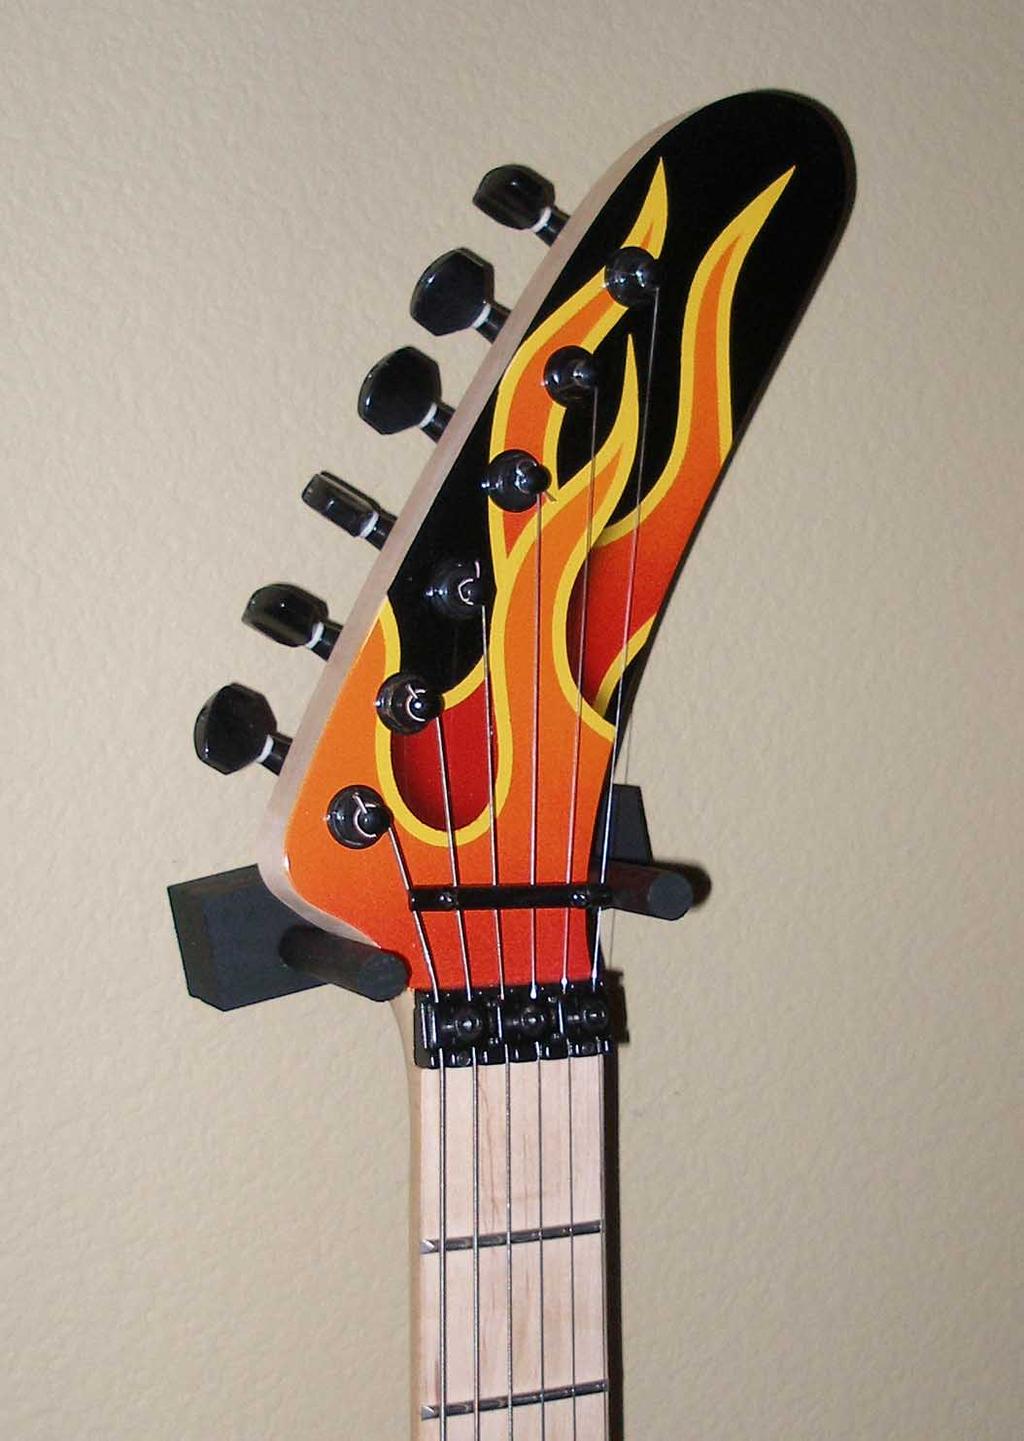 INTRODUCTION As the guy behind PAINTYOUROWNGUITAR.COM and someone who s been painting guitars for over 20 years, I have more guitars and more guitar parts than you could imagine.